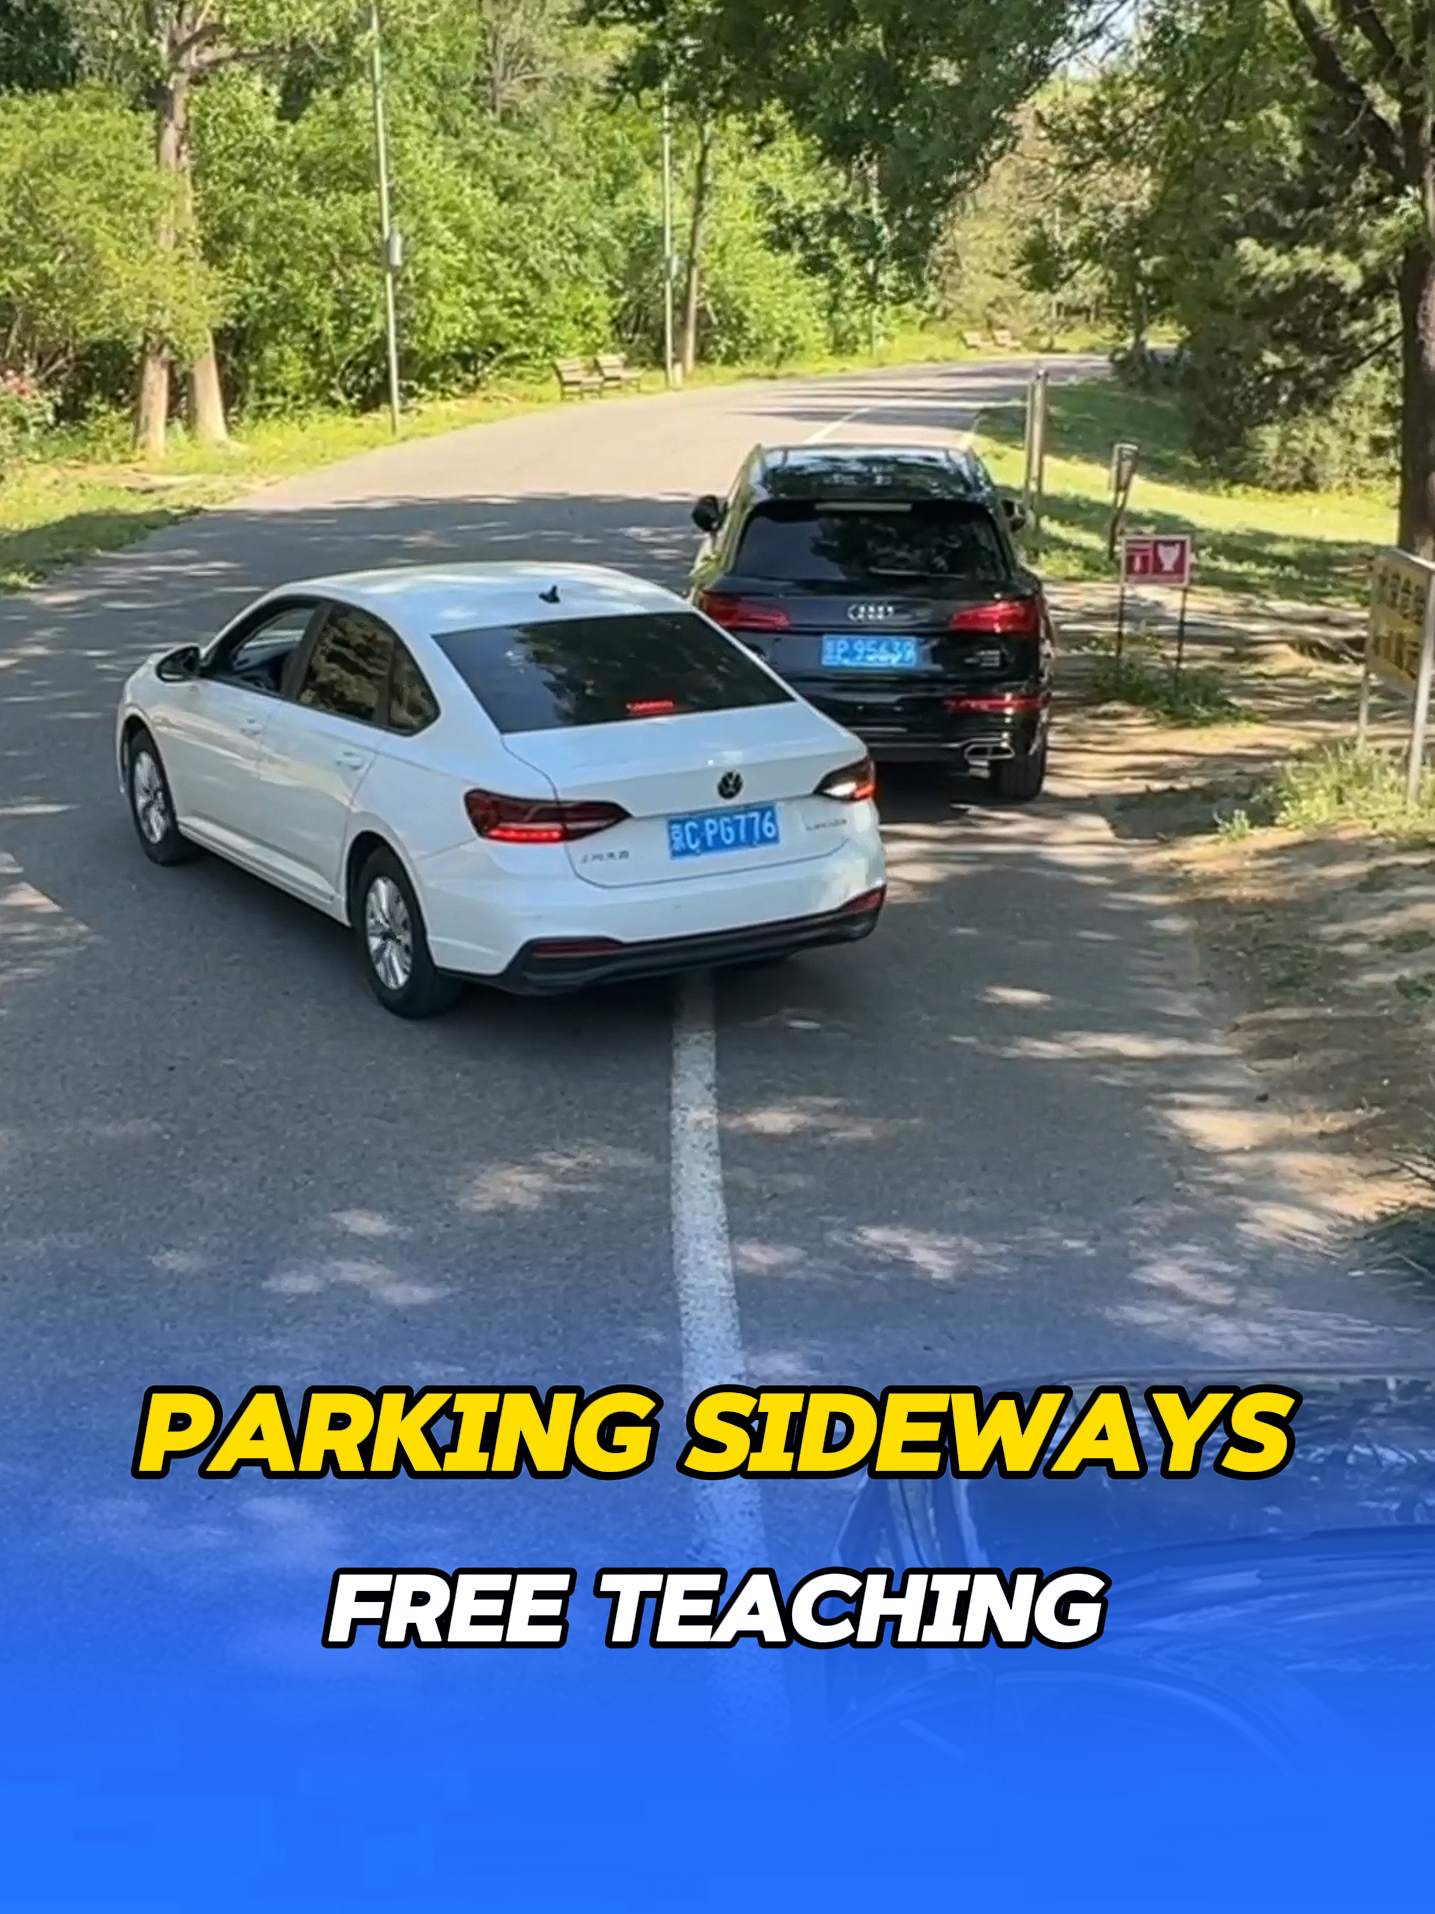 Parking skills that only 5% of drivers know, free teaching! #carsafety#automobile#tips#skills#parking